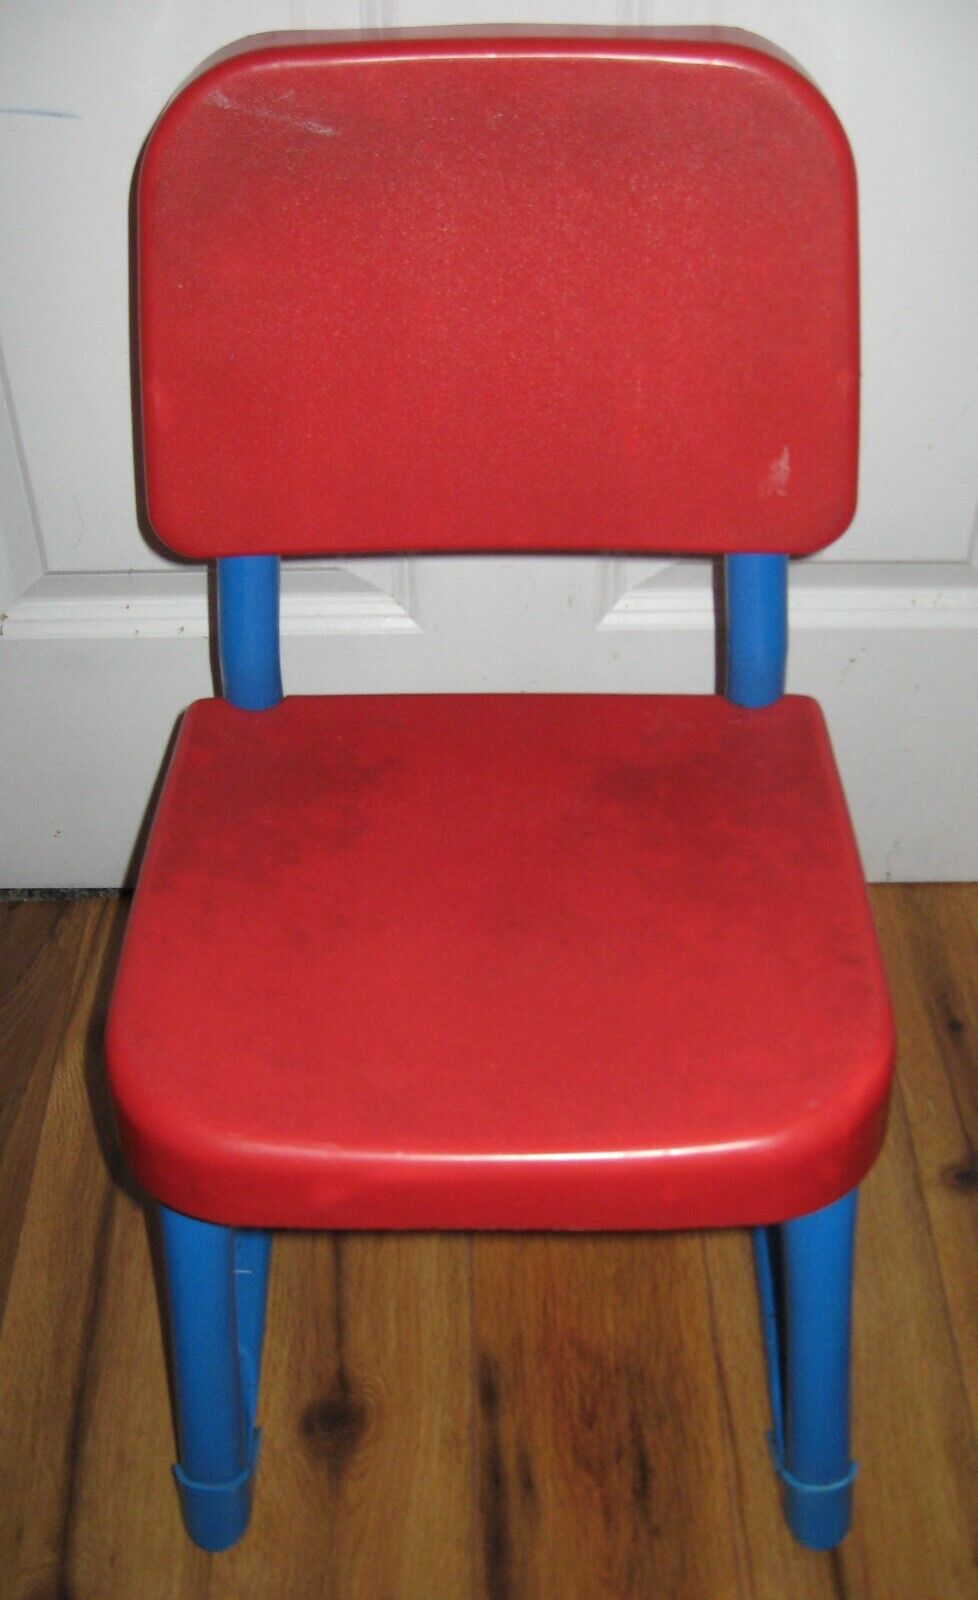 VINTAGE security 1985 Fisher Price Child Crafts Chair Preschool Chicago Mall Art Size